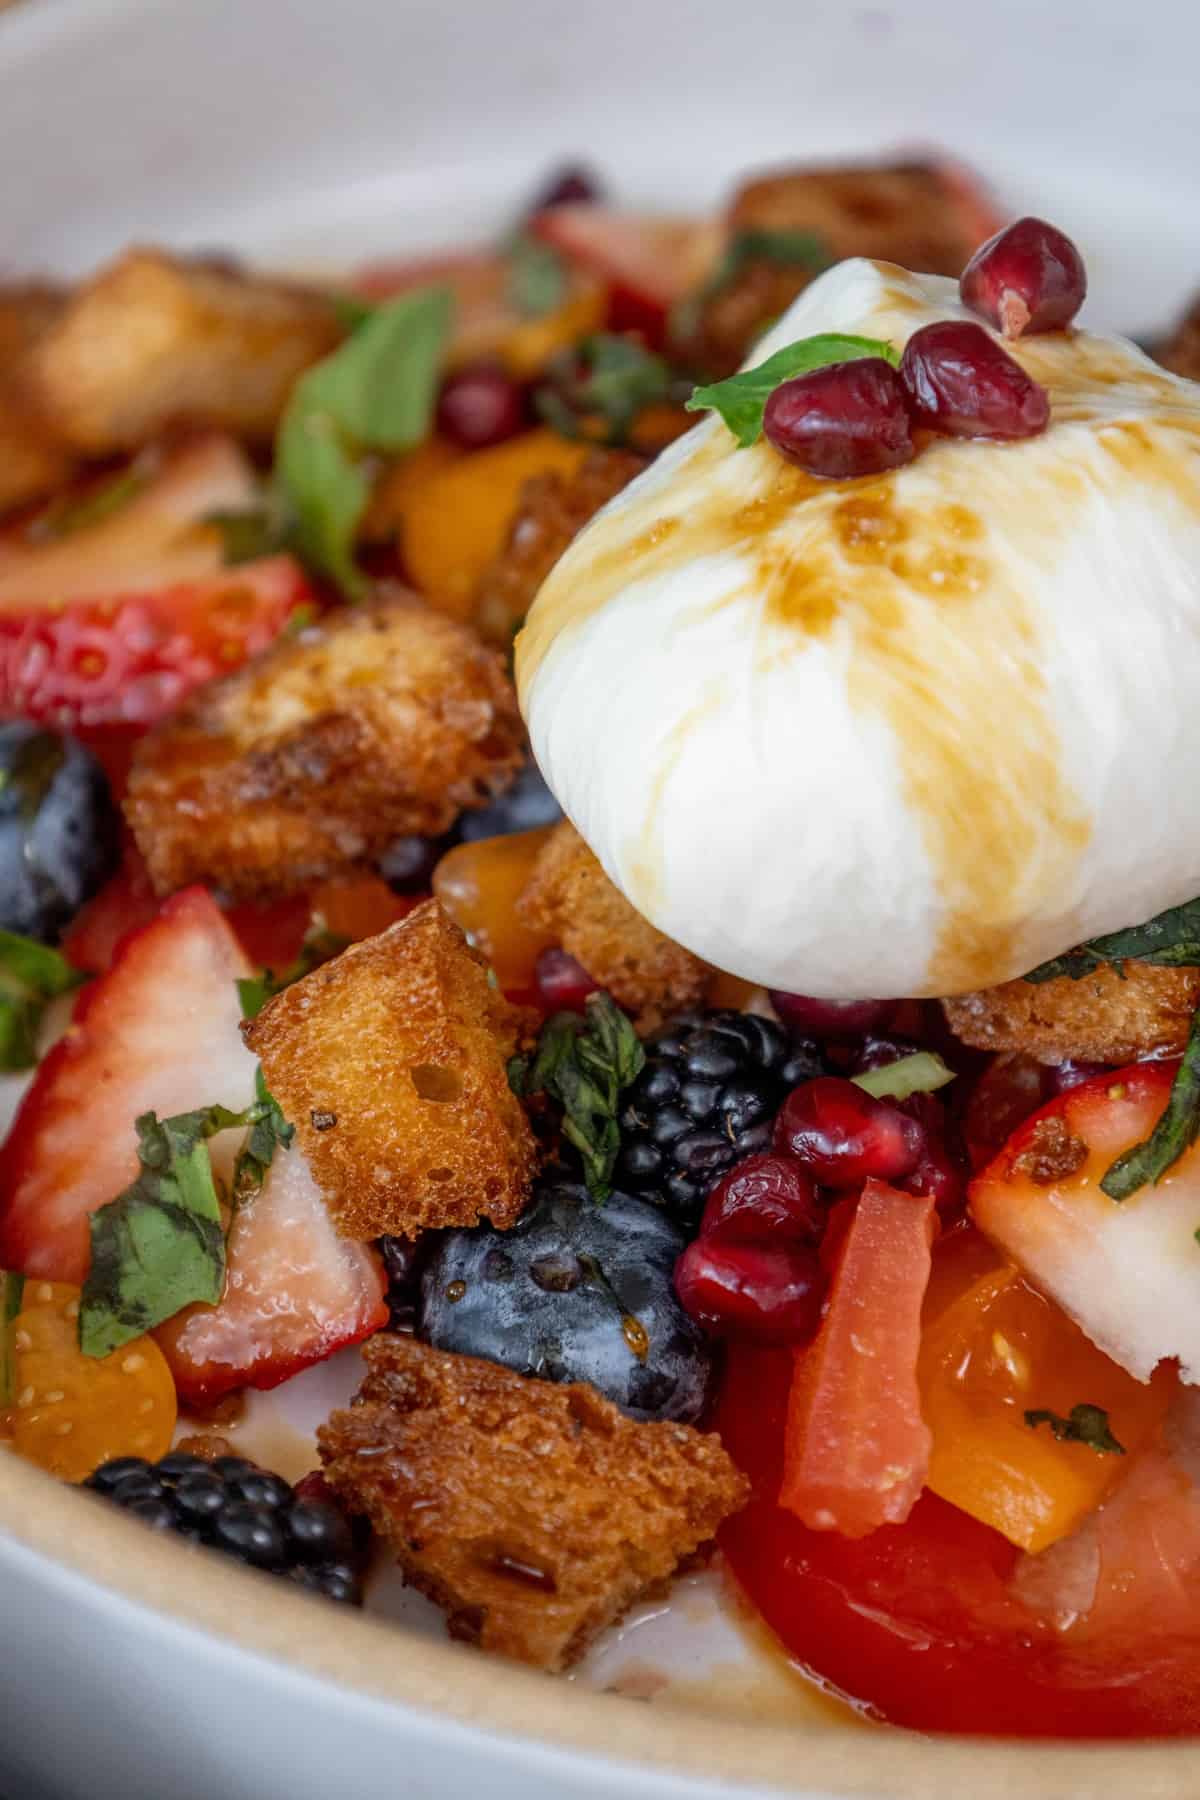 A bowl of fruit salad with a poached egg on top.